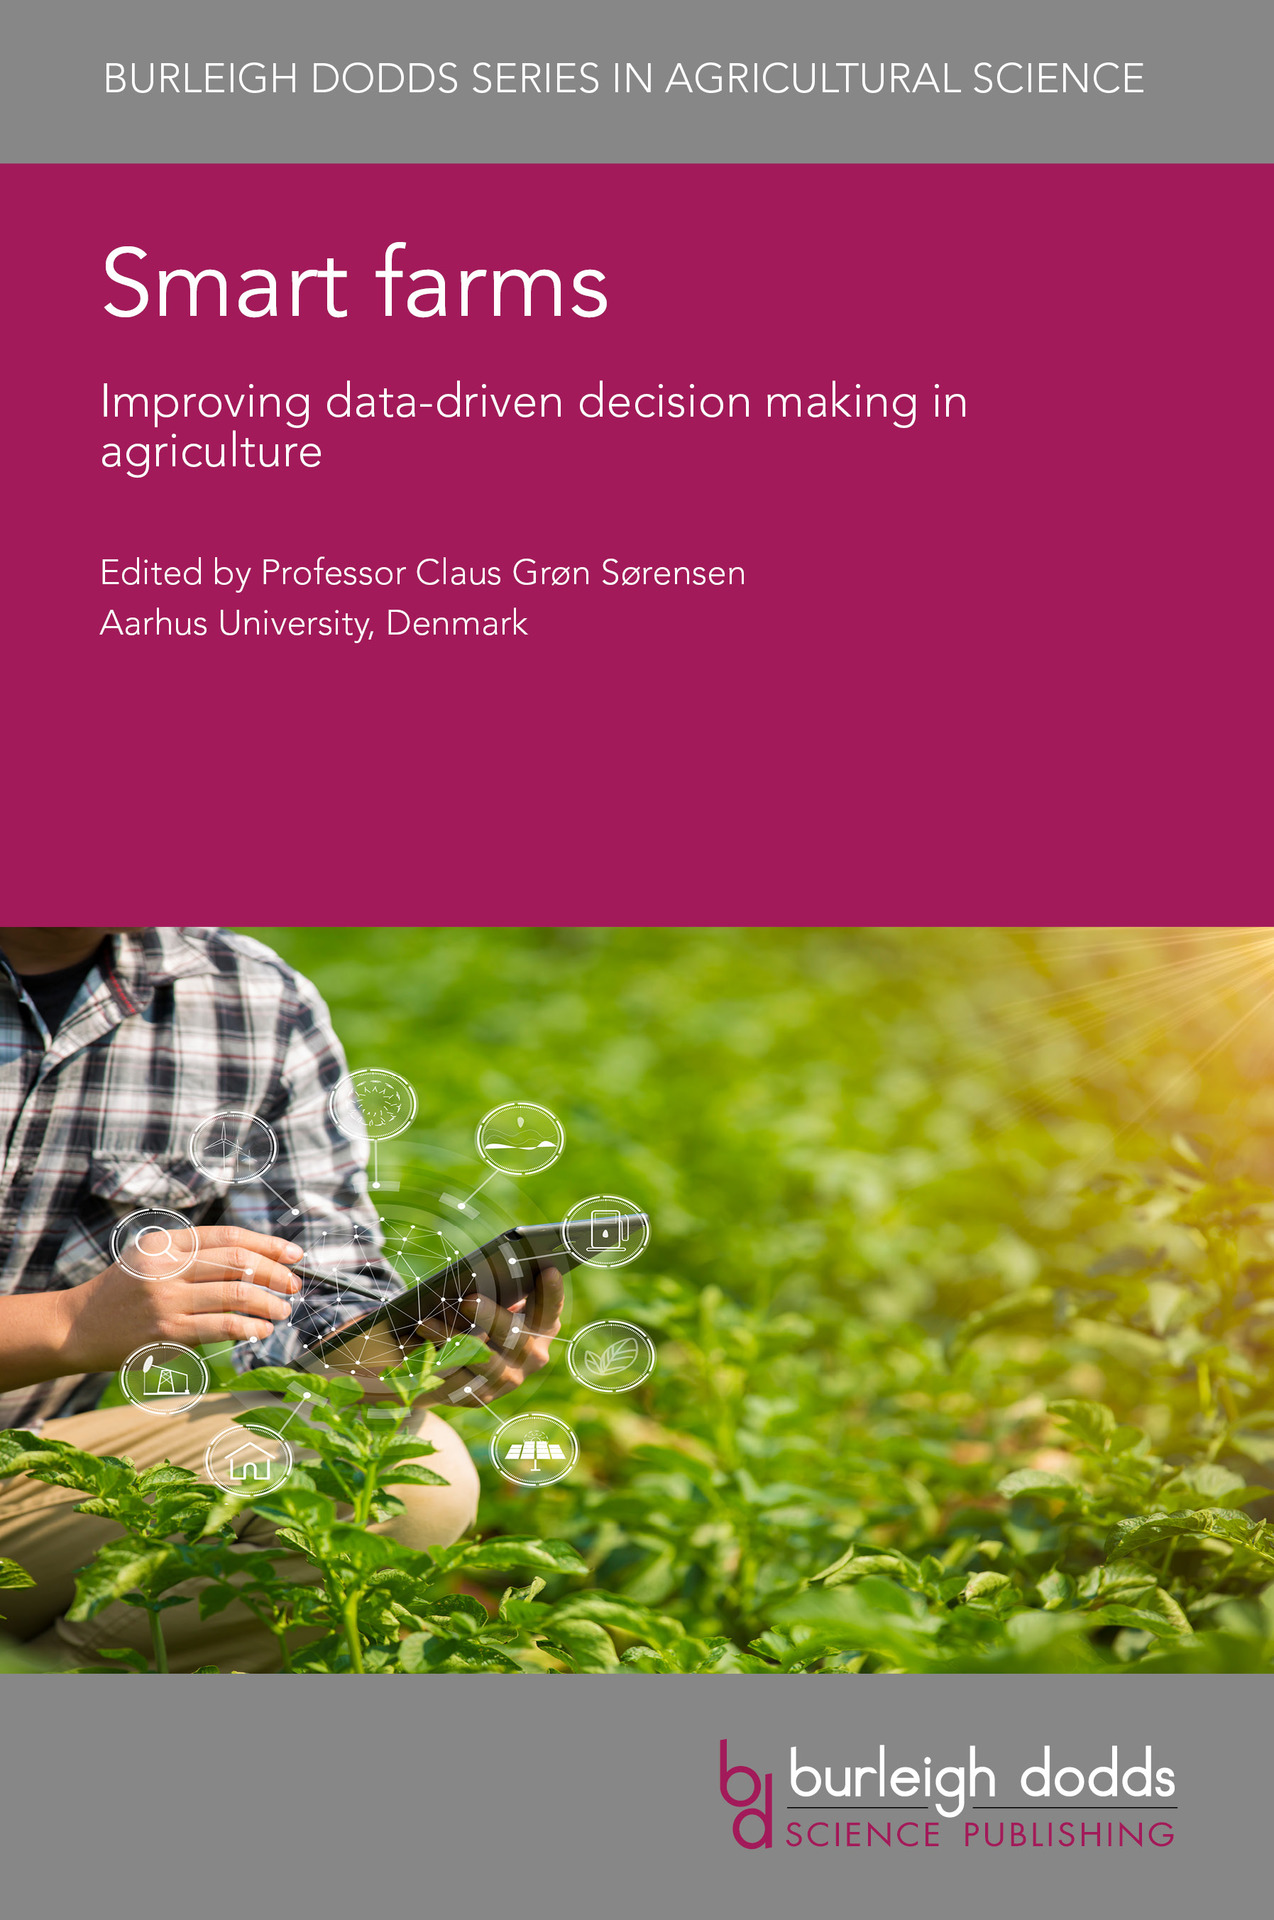 Smart farms: Improving data-driven decision making in agriculture